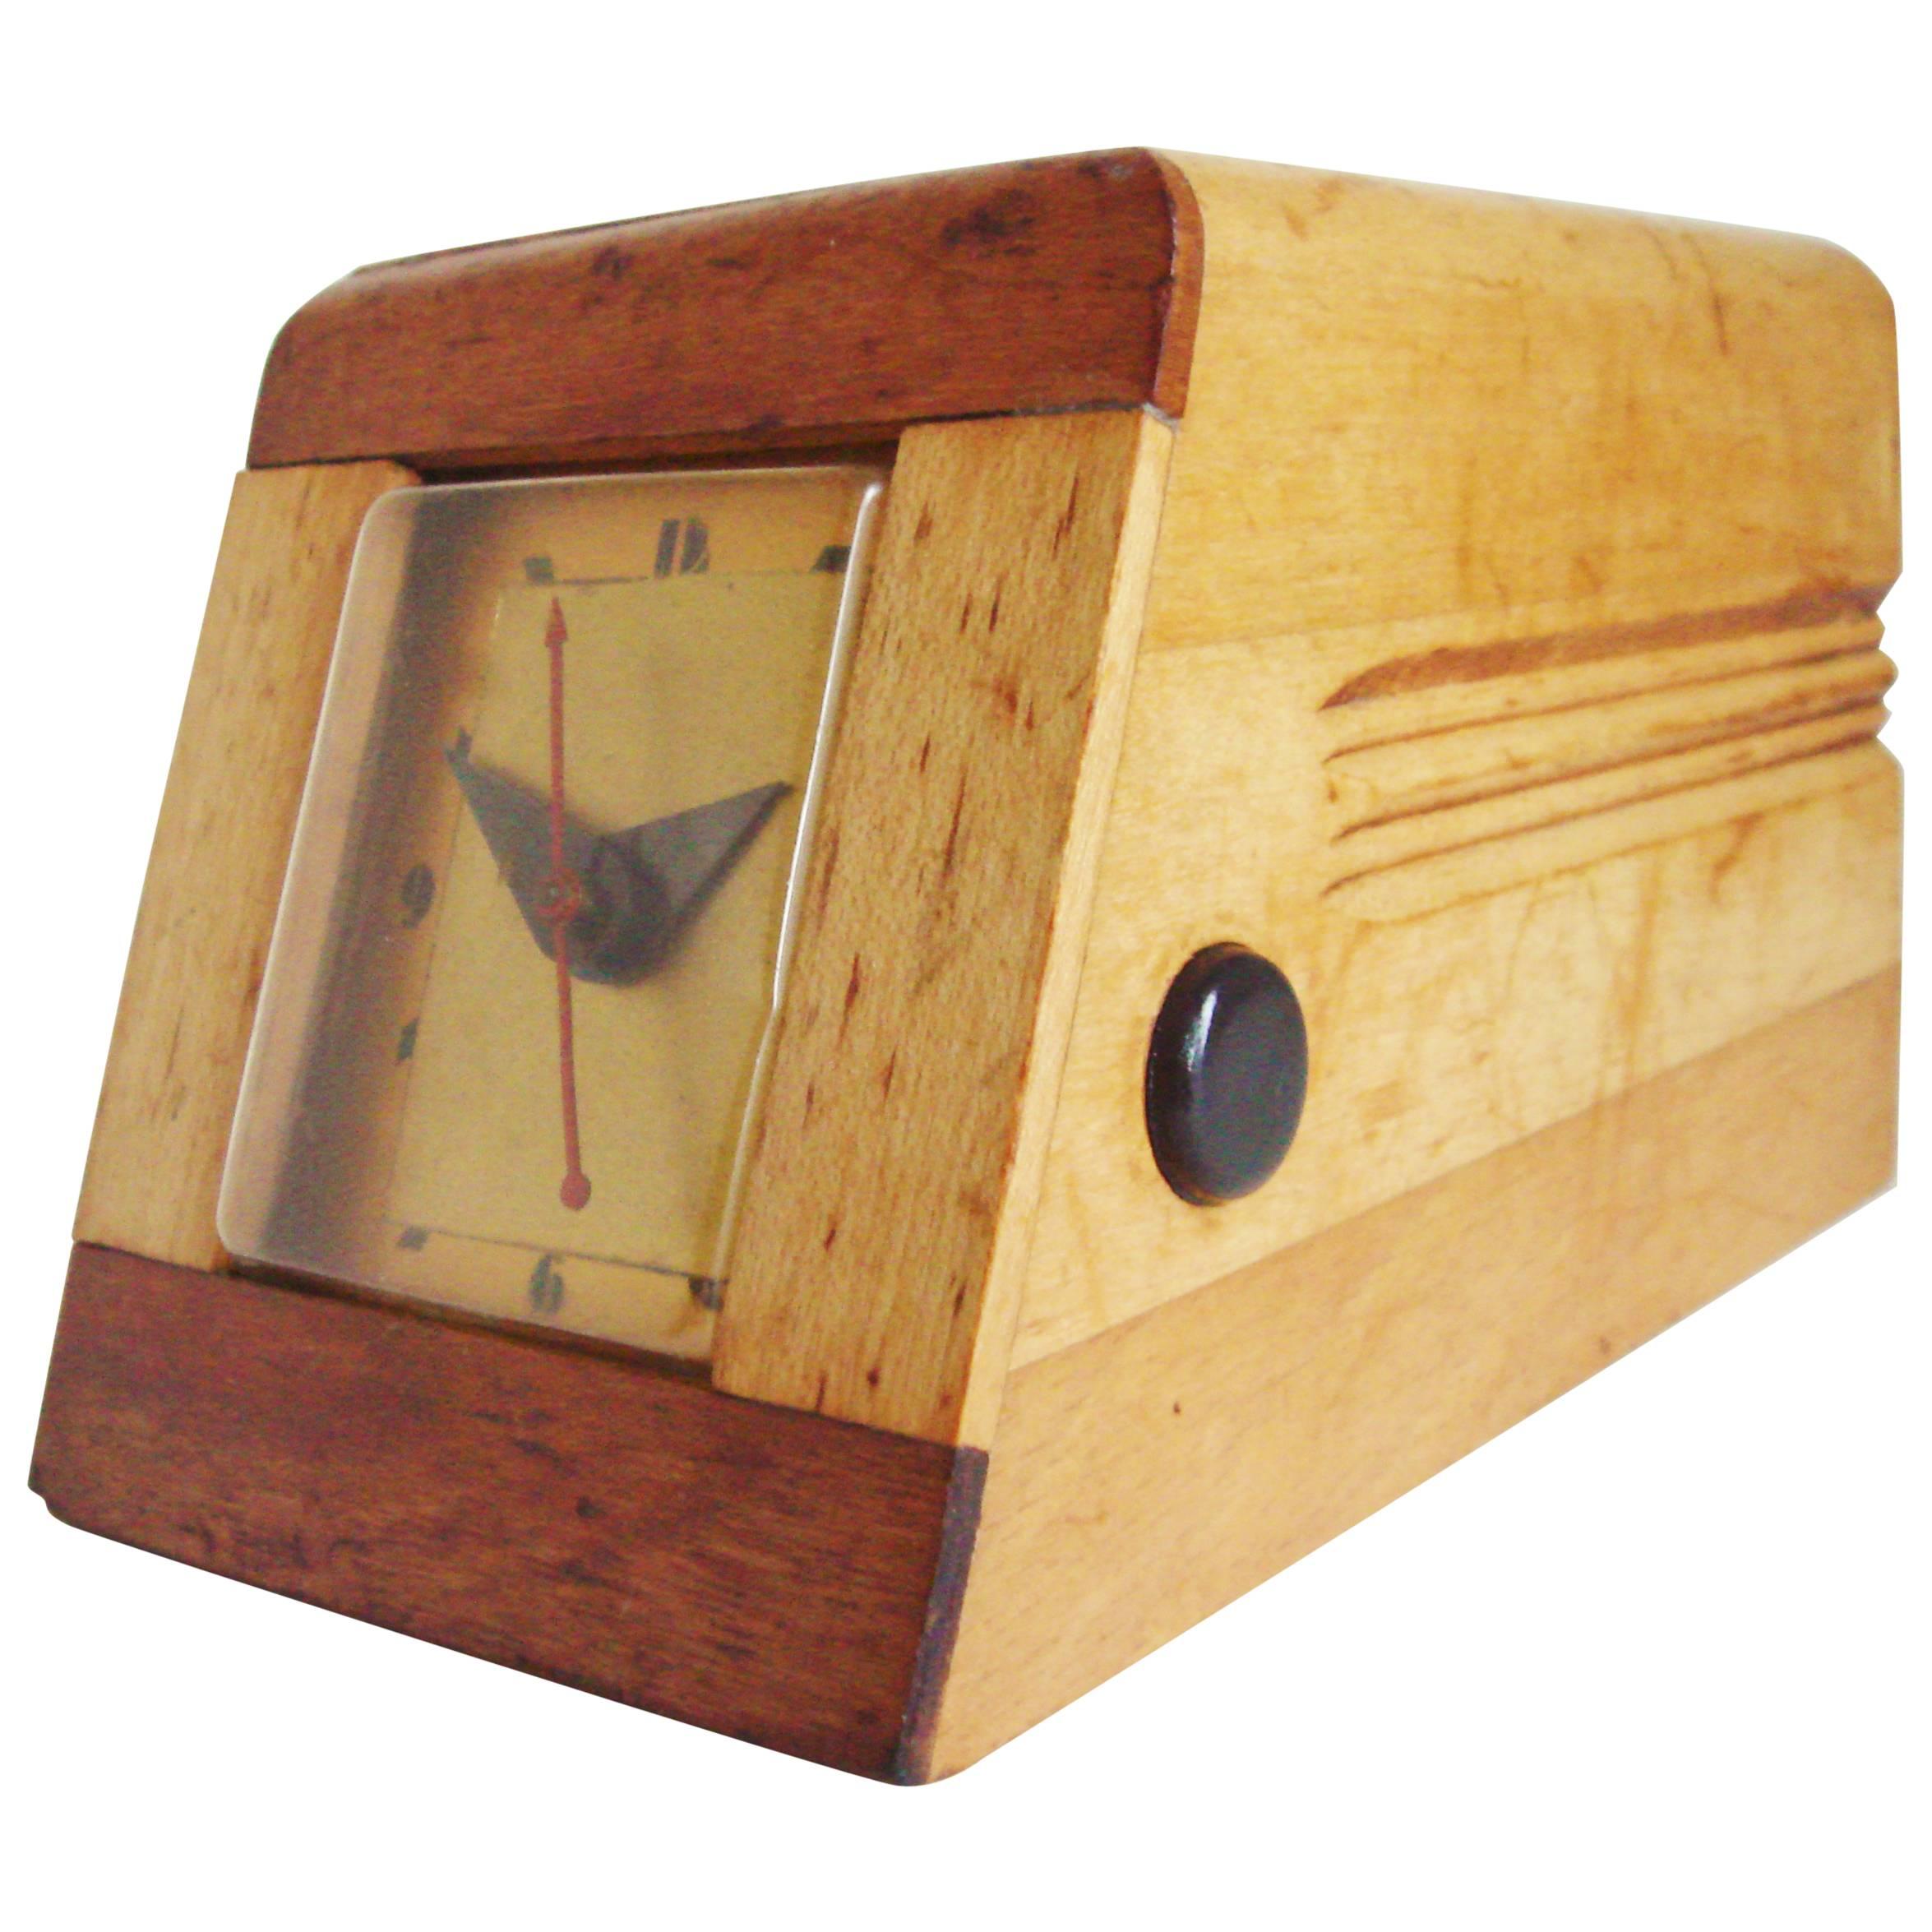 Rare American Art Deco Limited Edition Wooden Cased "Vgoue" Electric Desk Clock